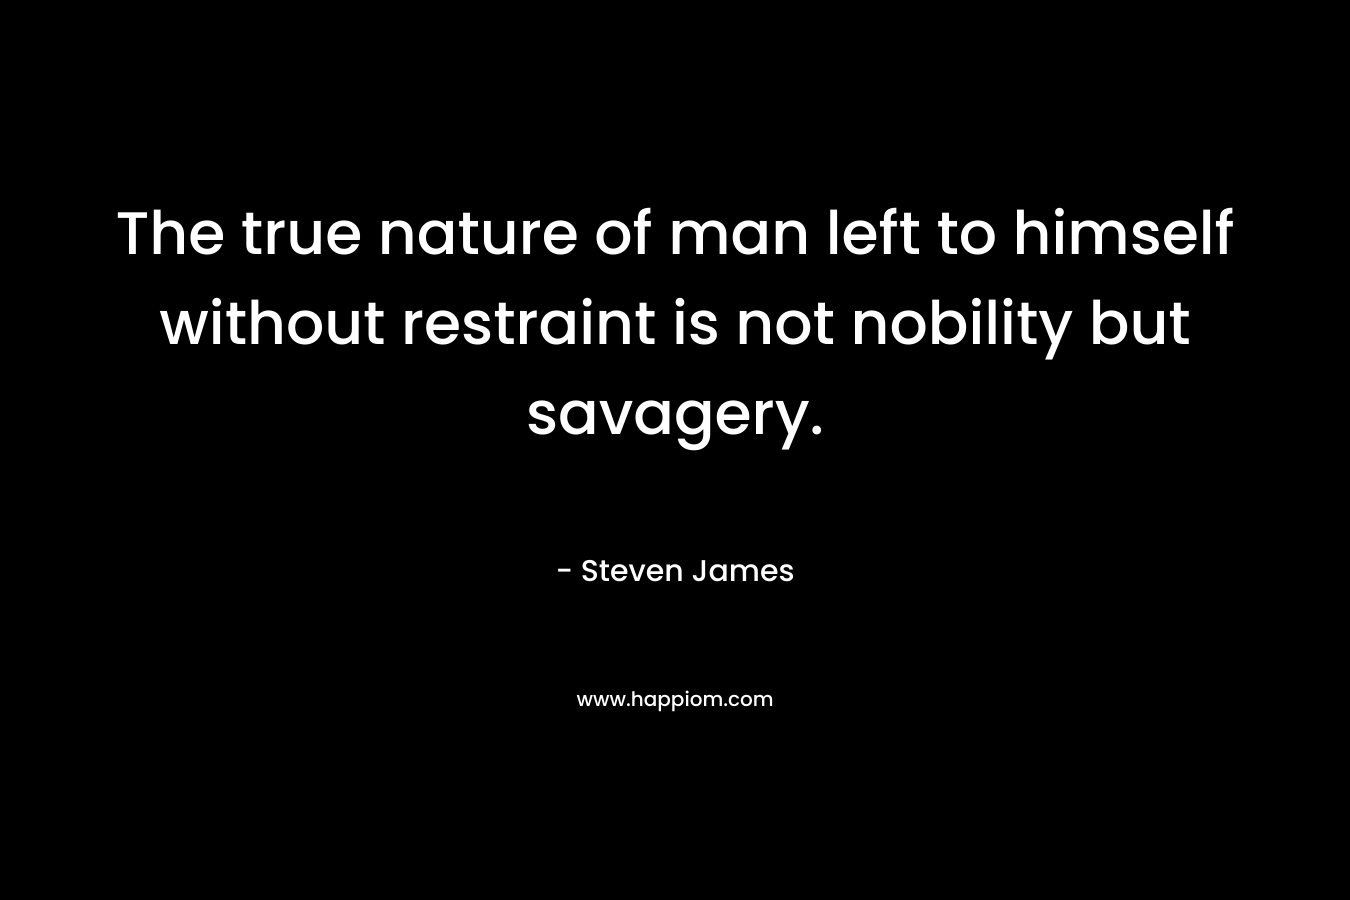 The true nature of man left to himself without restraint is not nobility but savagery. – Steven James